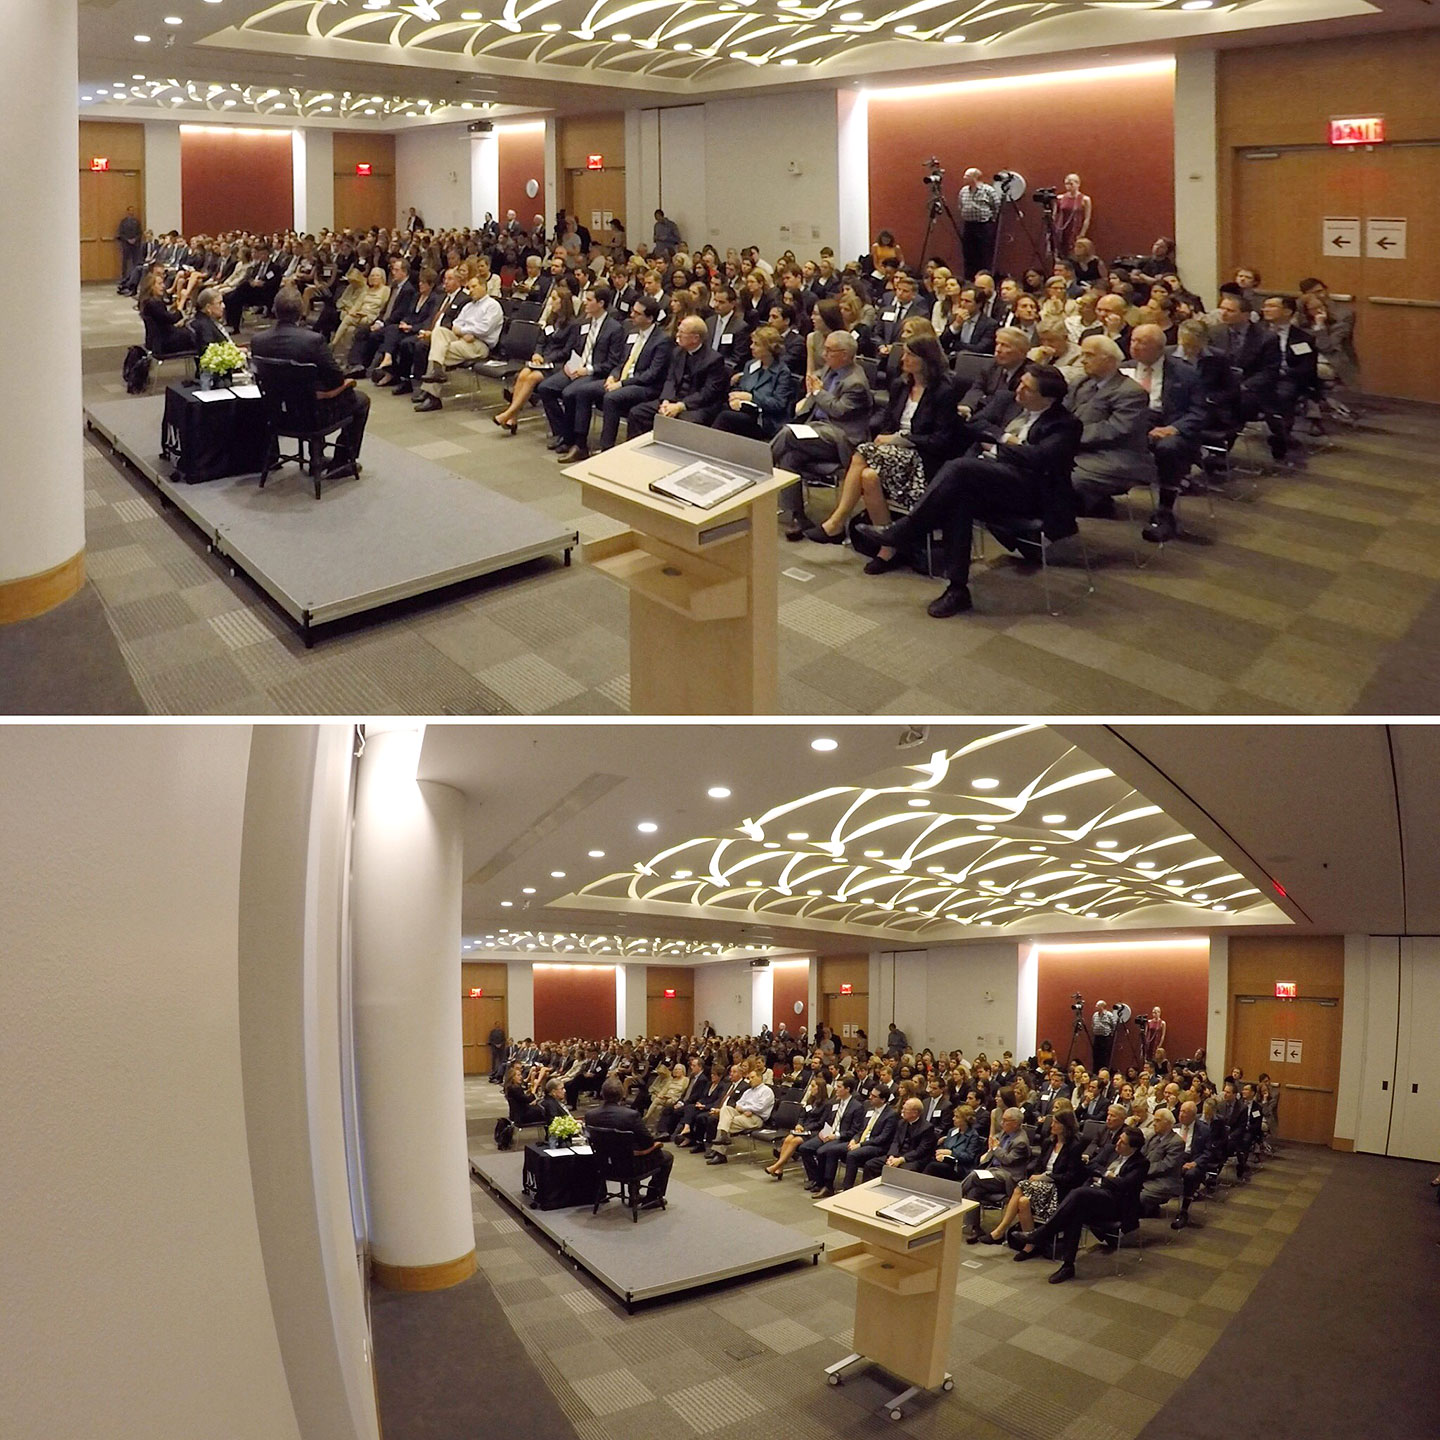 GoPro frames showing before (below) and after (above) doing fisheye correction and perspective correction in post. September, 2016.